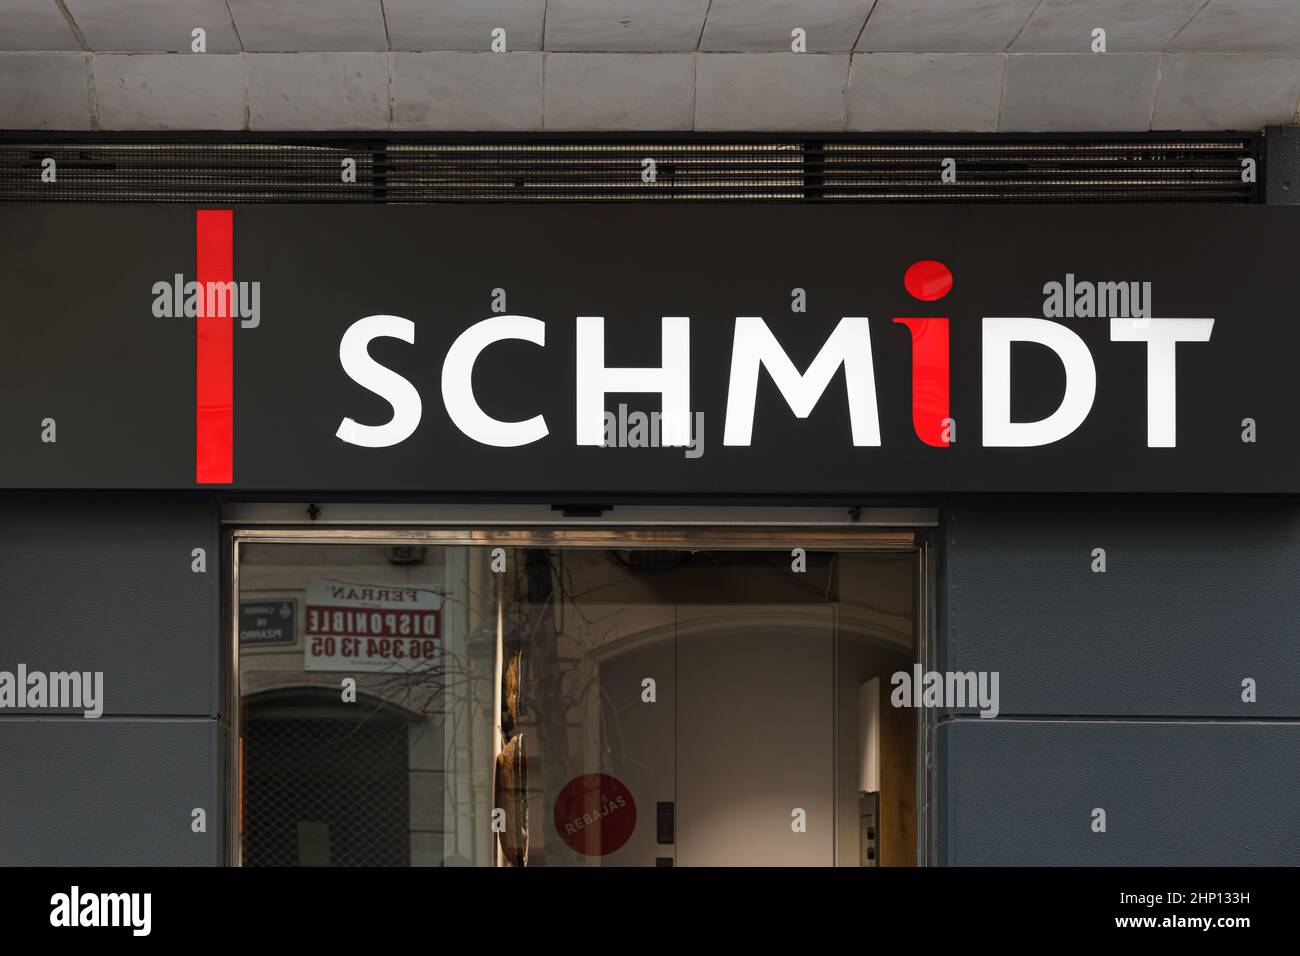 VALENCIA, SPAIN - FEBRUARY 15, 2022: Schmidt is a european company specializing in design of modern kitchen and home interiors Stock Photo